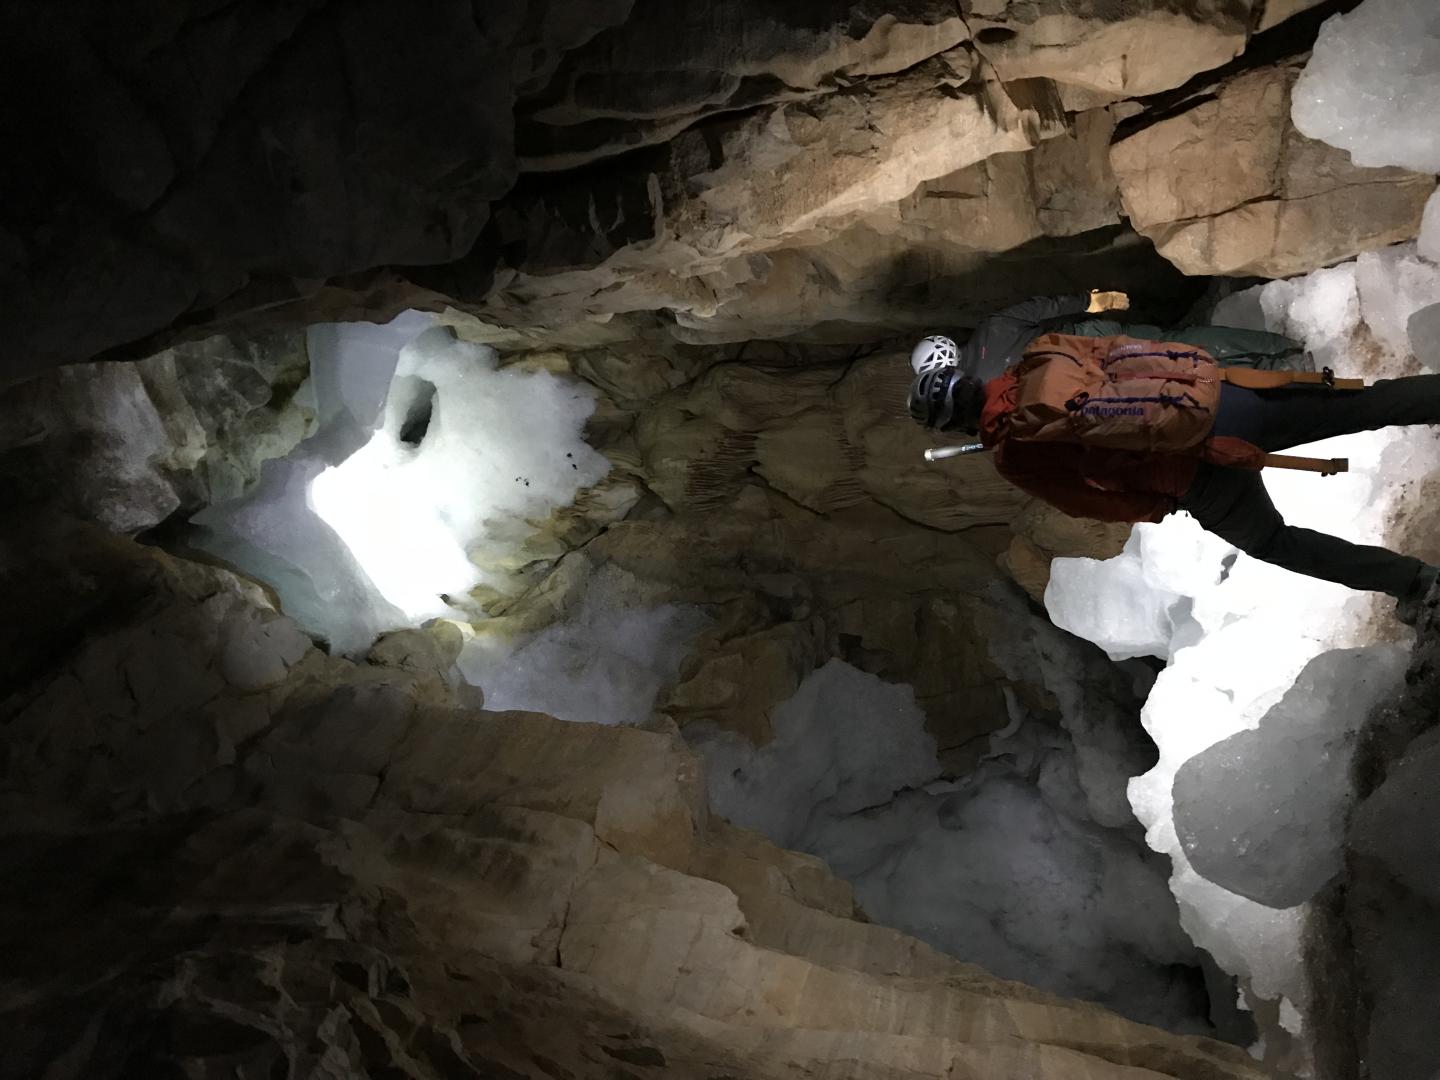 Climate revelations in Canadian caves' mineral deposits